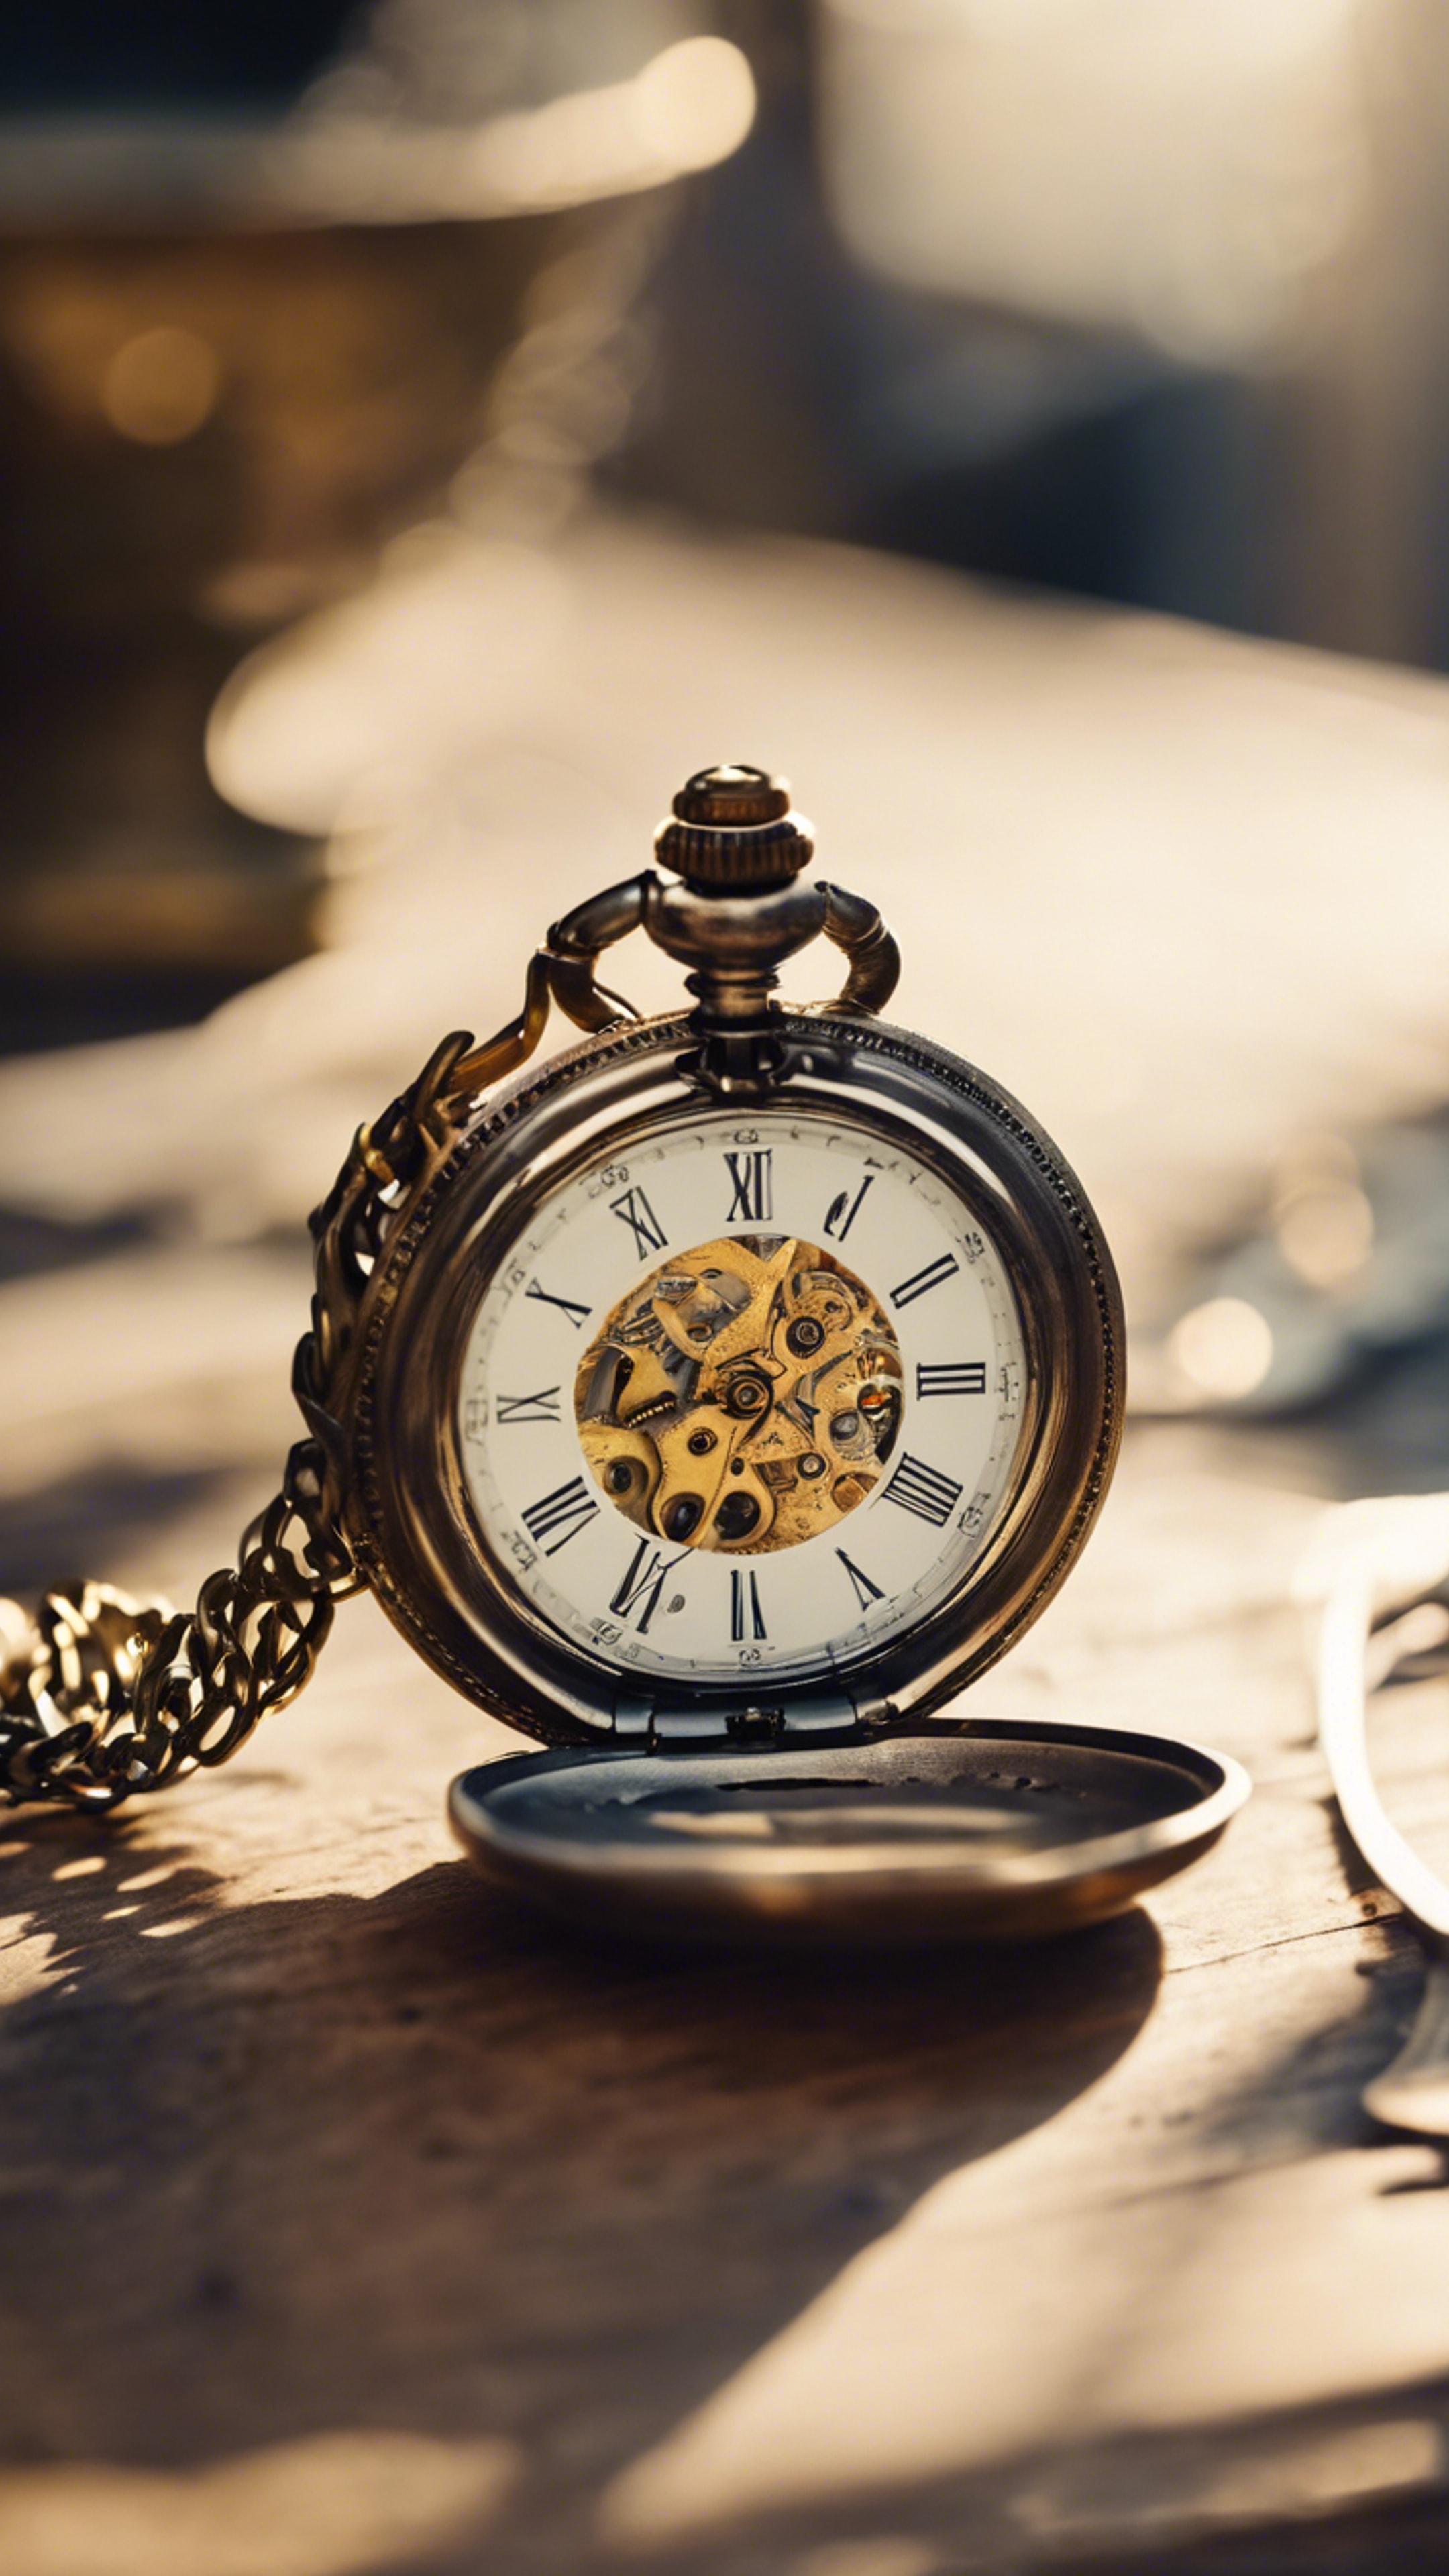 A vintage pocket watch, lying open on an antique table, reflecting the golden rays of afternoon sun. Hintergrund[0f0622e1f4f2468db79b]